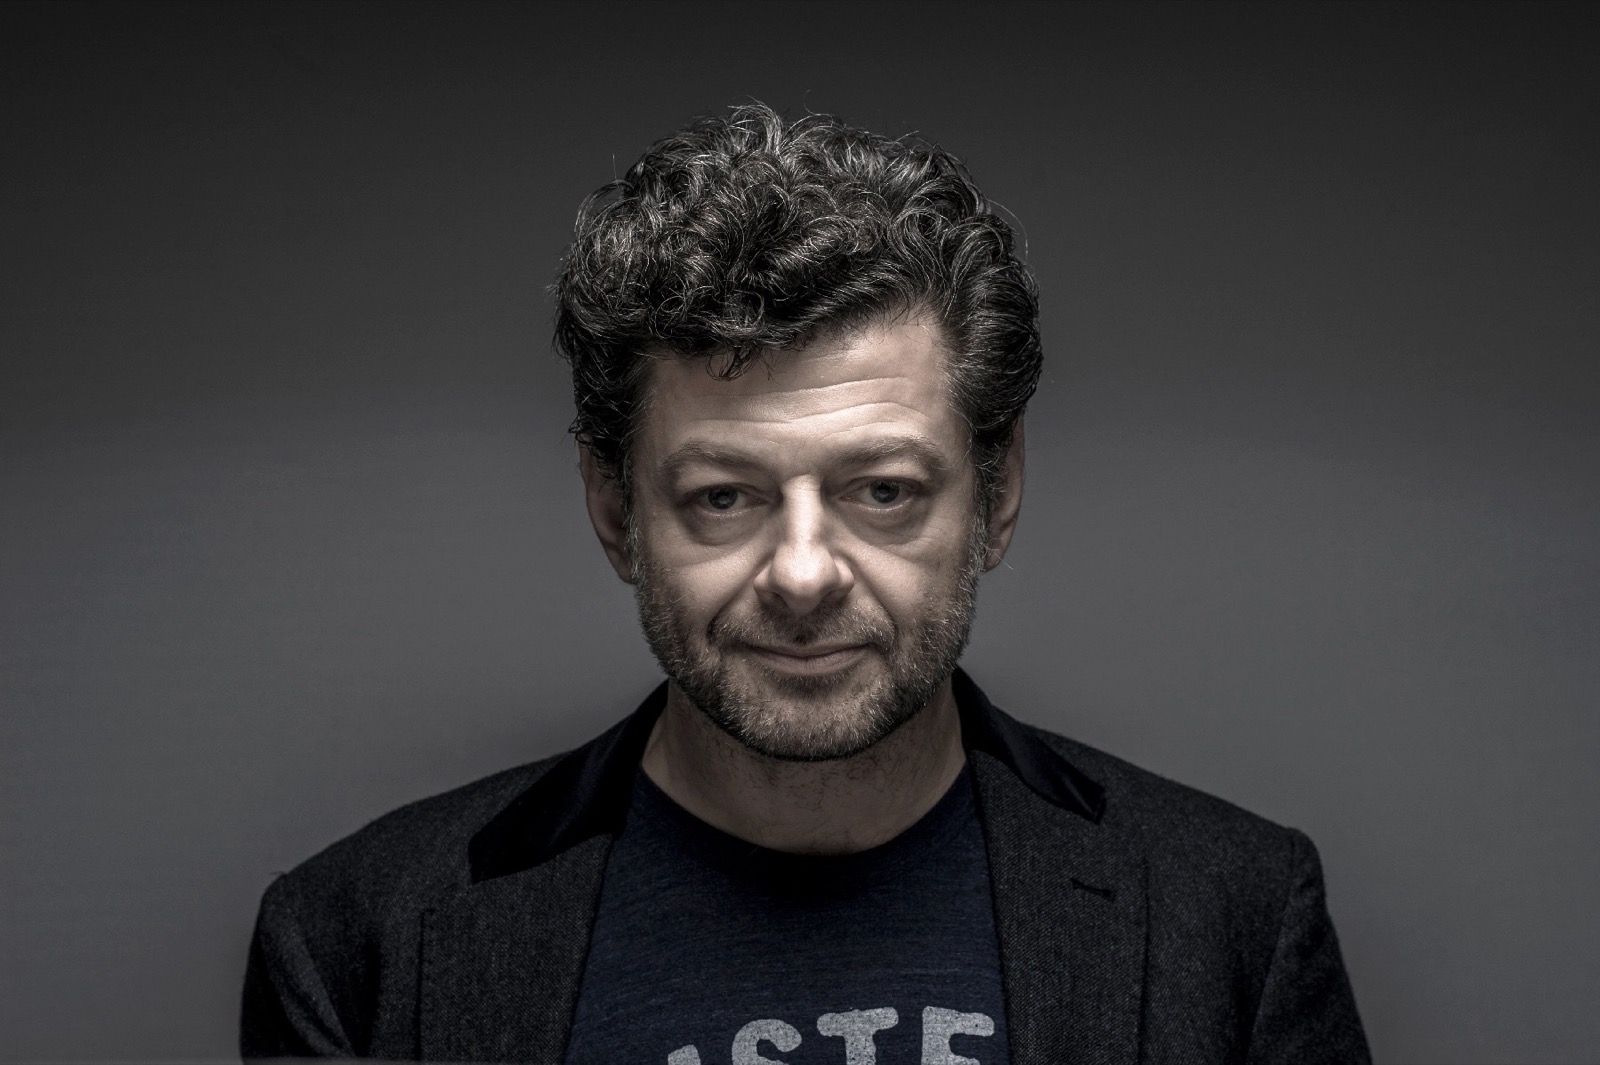 If You Get 16/25 on This Random Knowledge Quiz, You Know Something About Every Subject Andy Serkis